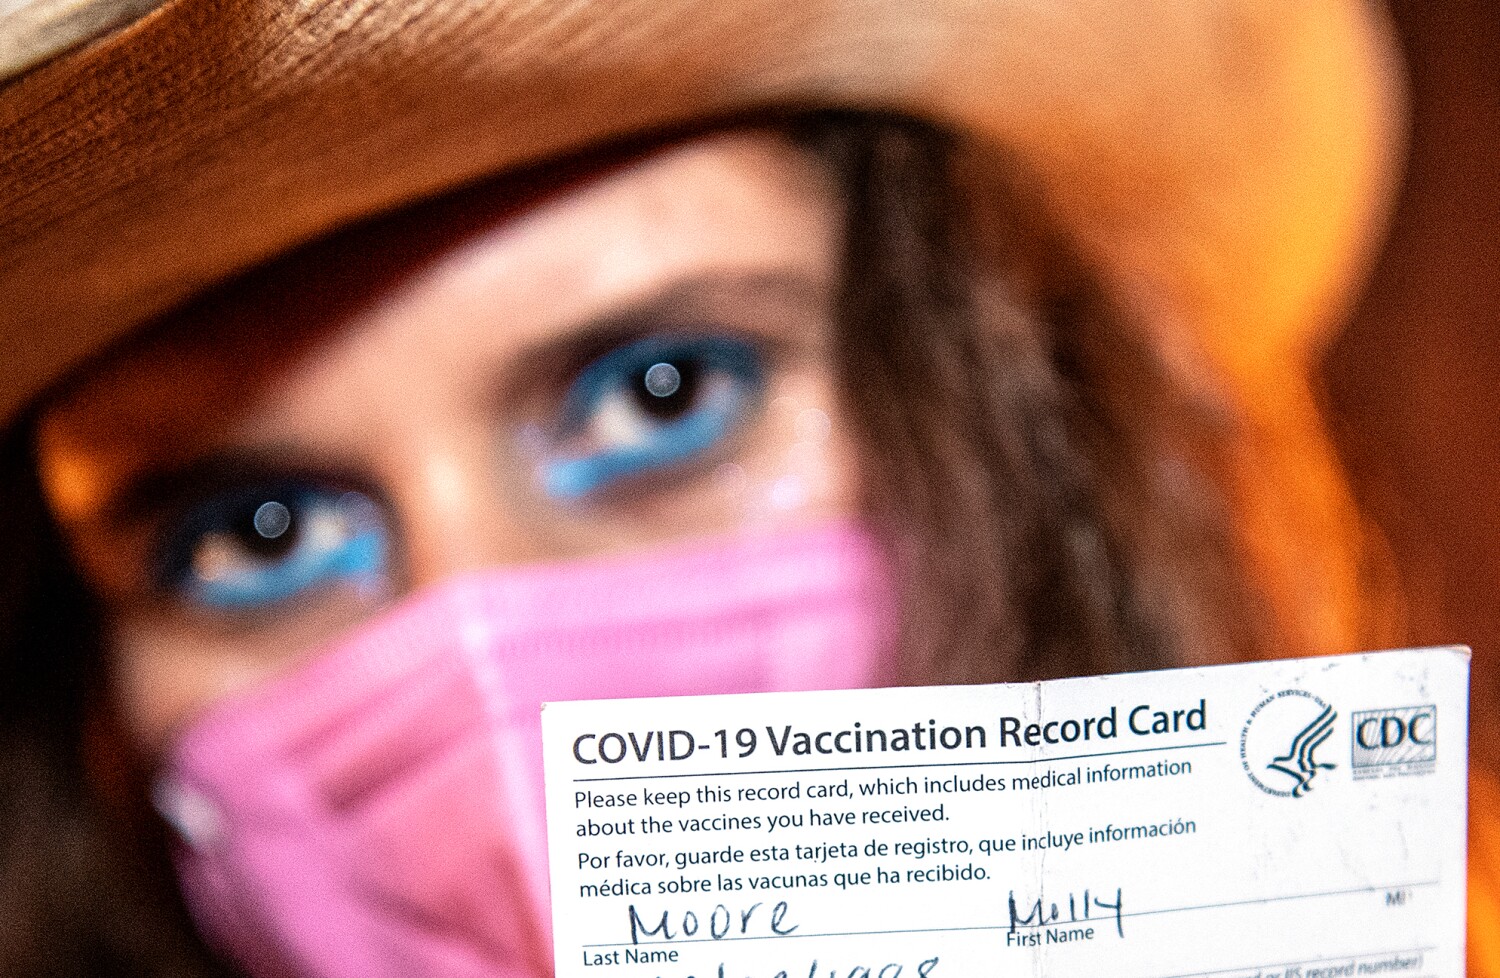 Going out? Here are the L.A. businesses that require proof of COVID-19 vaccine